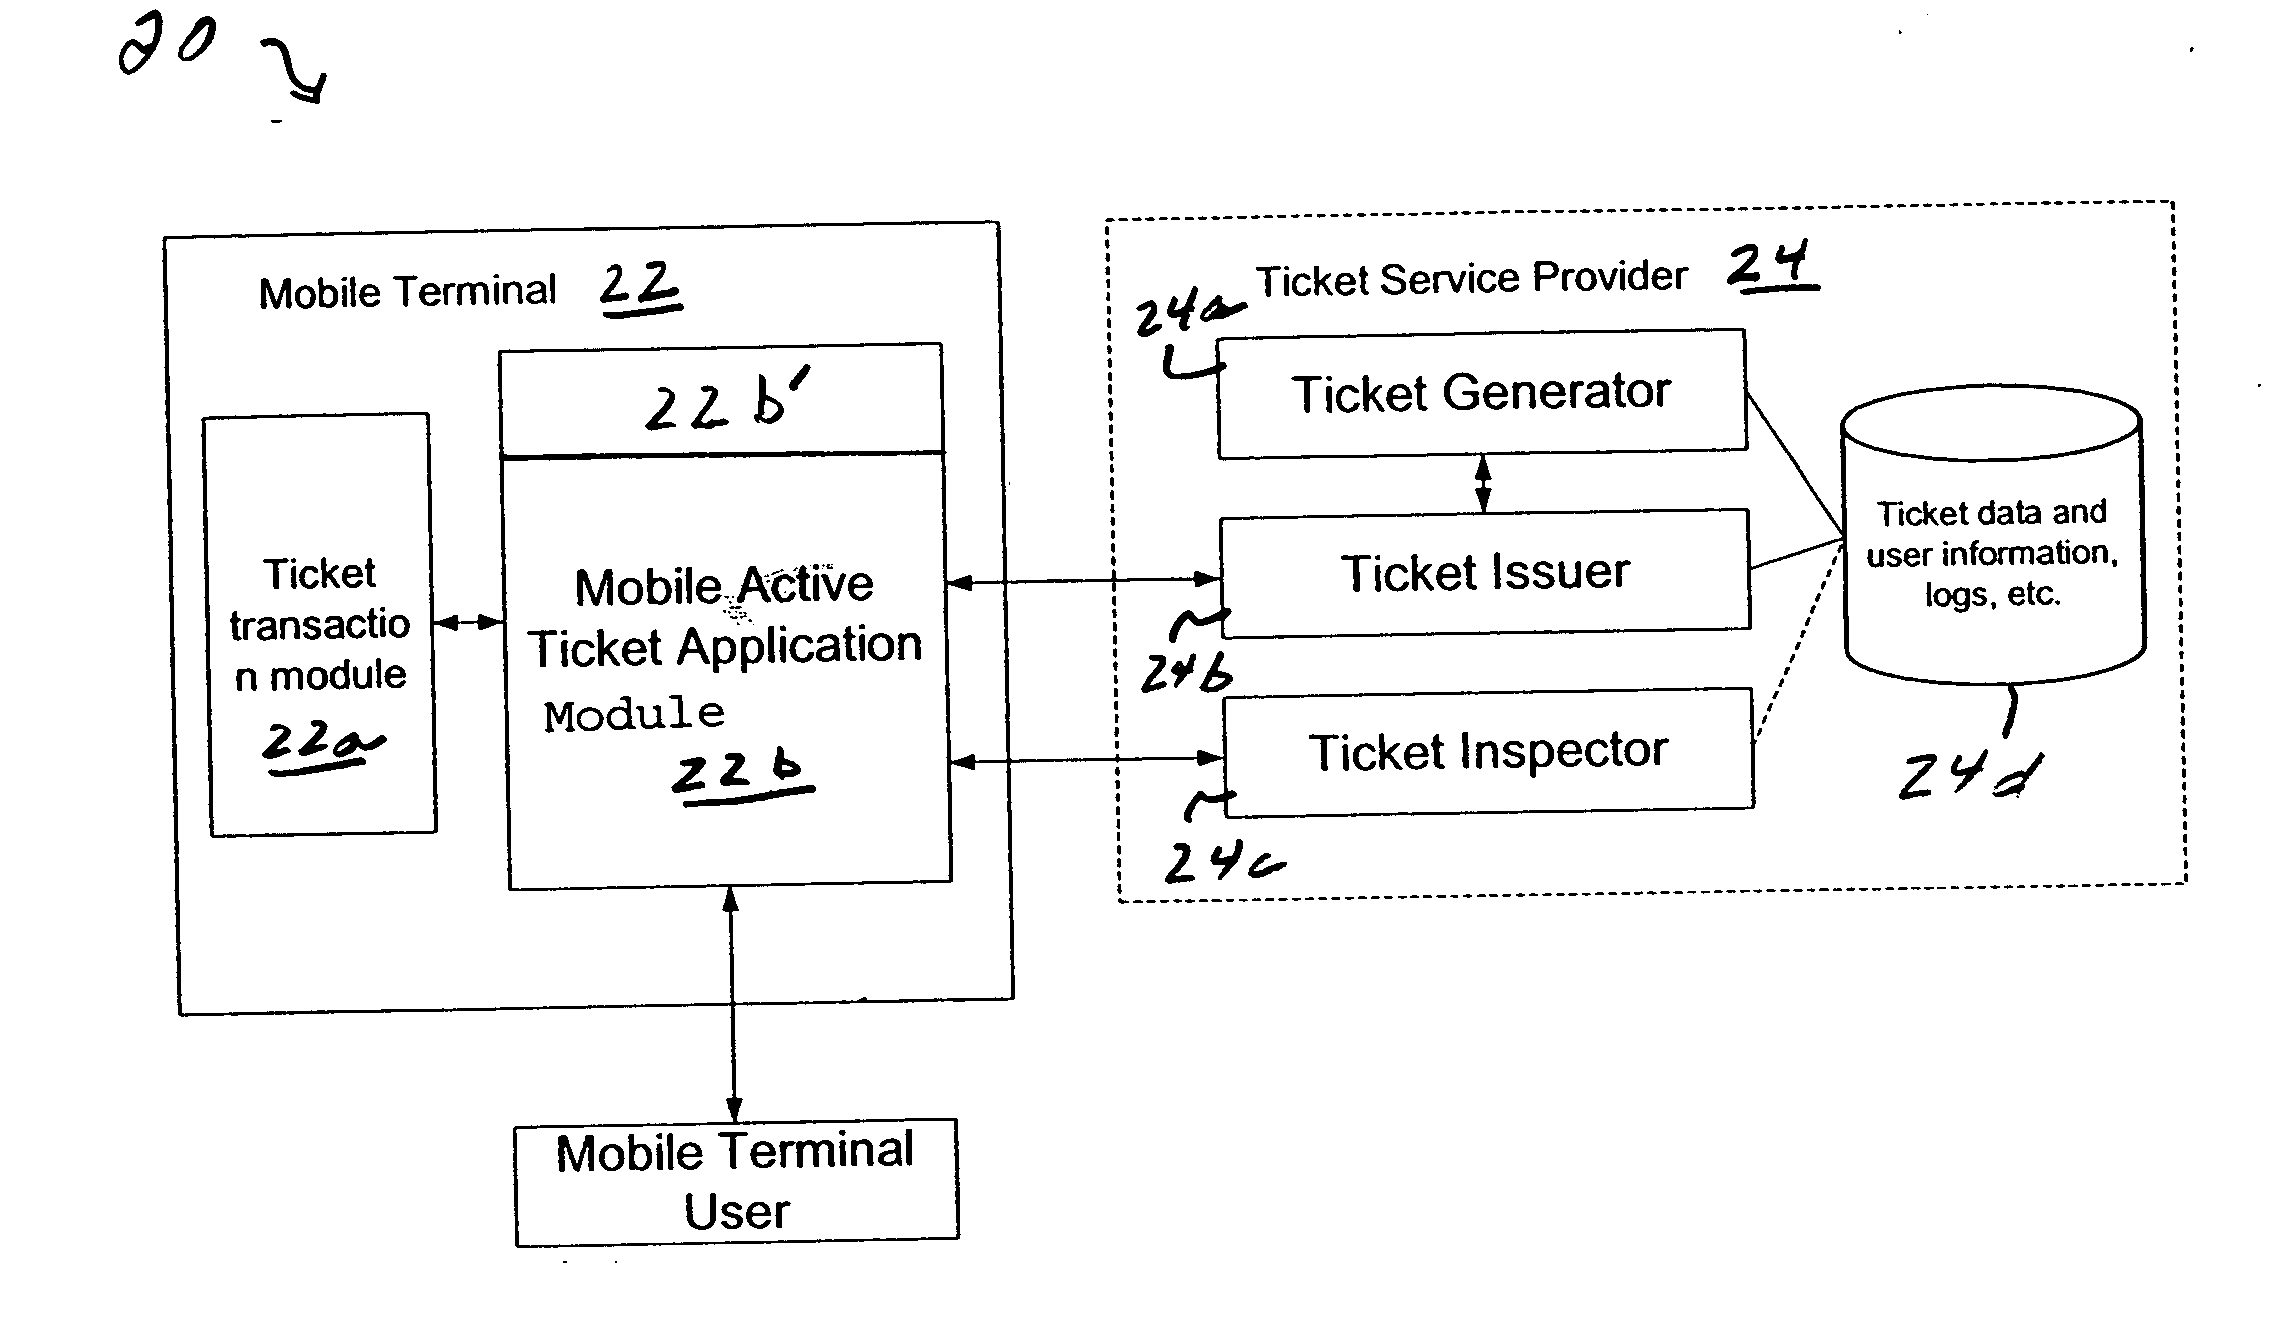 Active ticket with dynamic characteristic such as appearance with various validation options